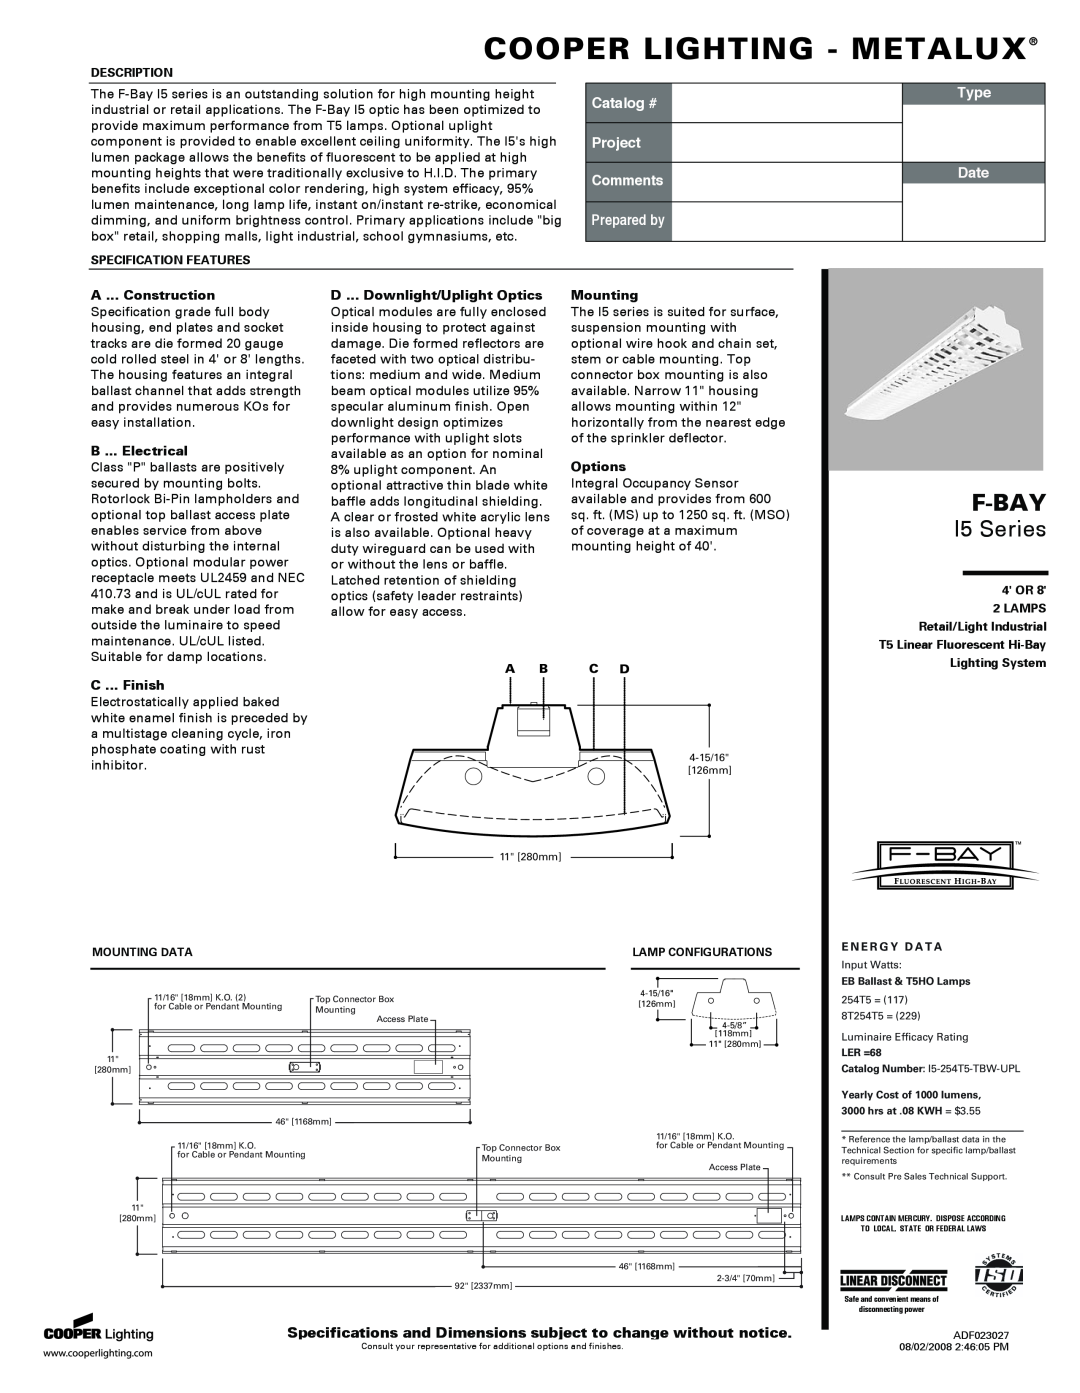 Cooper Lighting 30 specifications Cooper Lighting - Metalux, F-Bay, I5 Series, Catalog #, Project Comments, Prepared by 